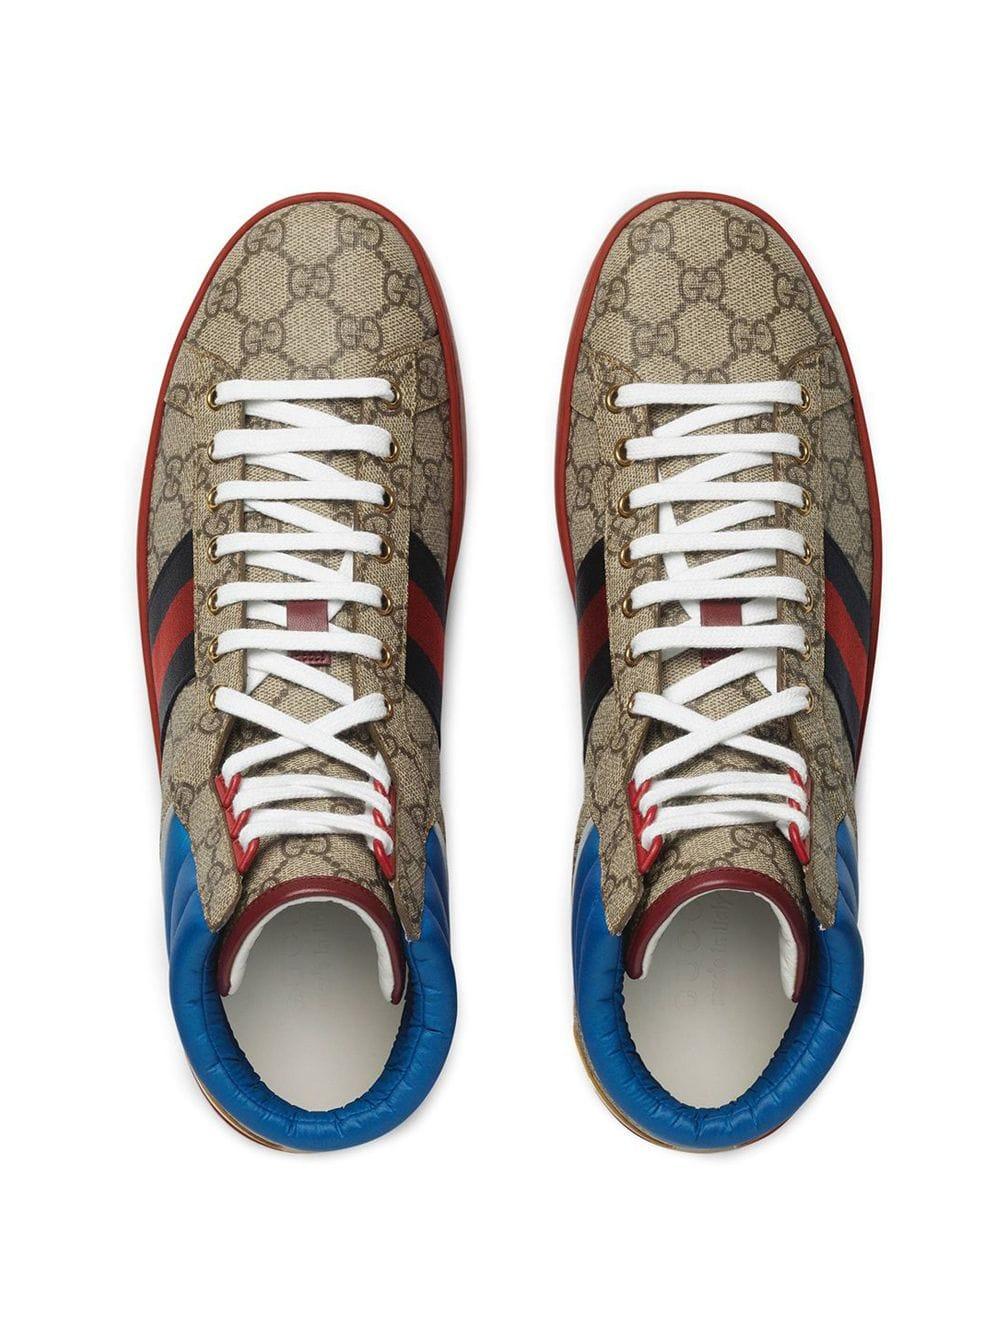 gucci sneakers alte, super sell Save 55% - dviez.com.br